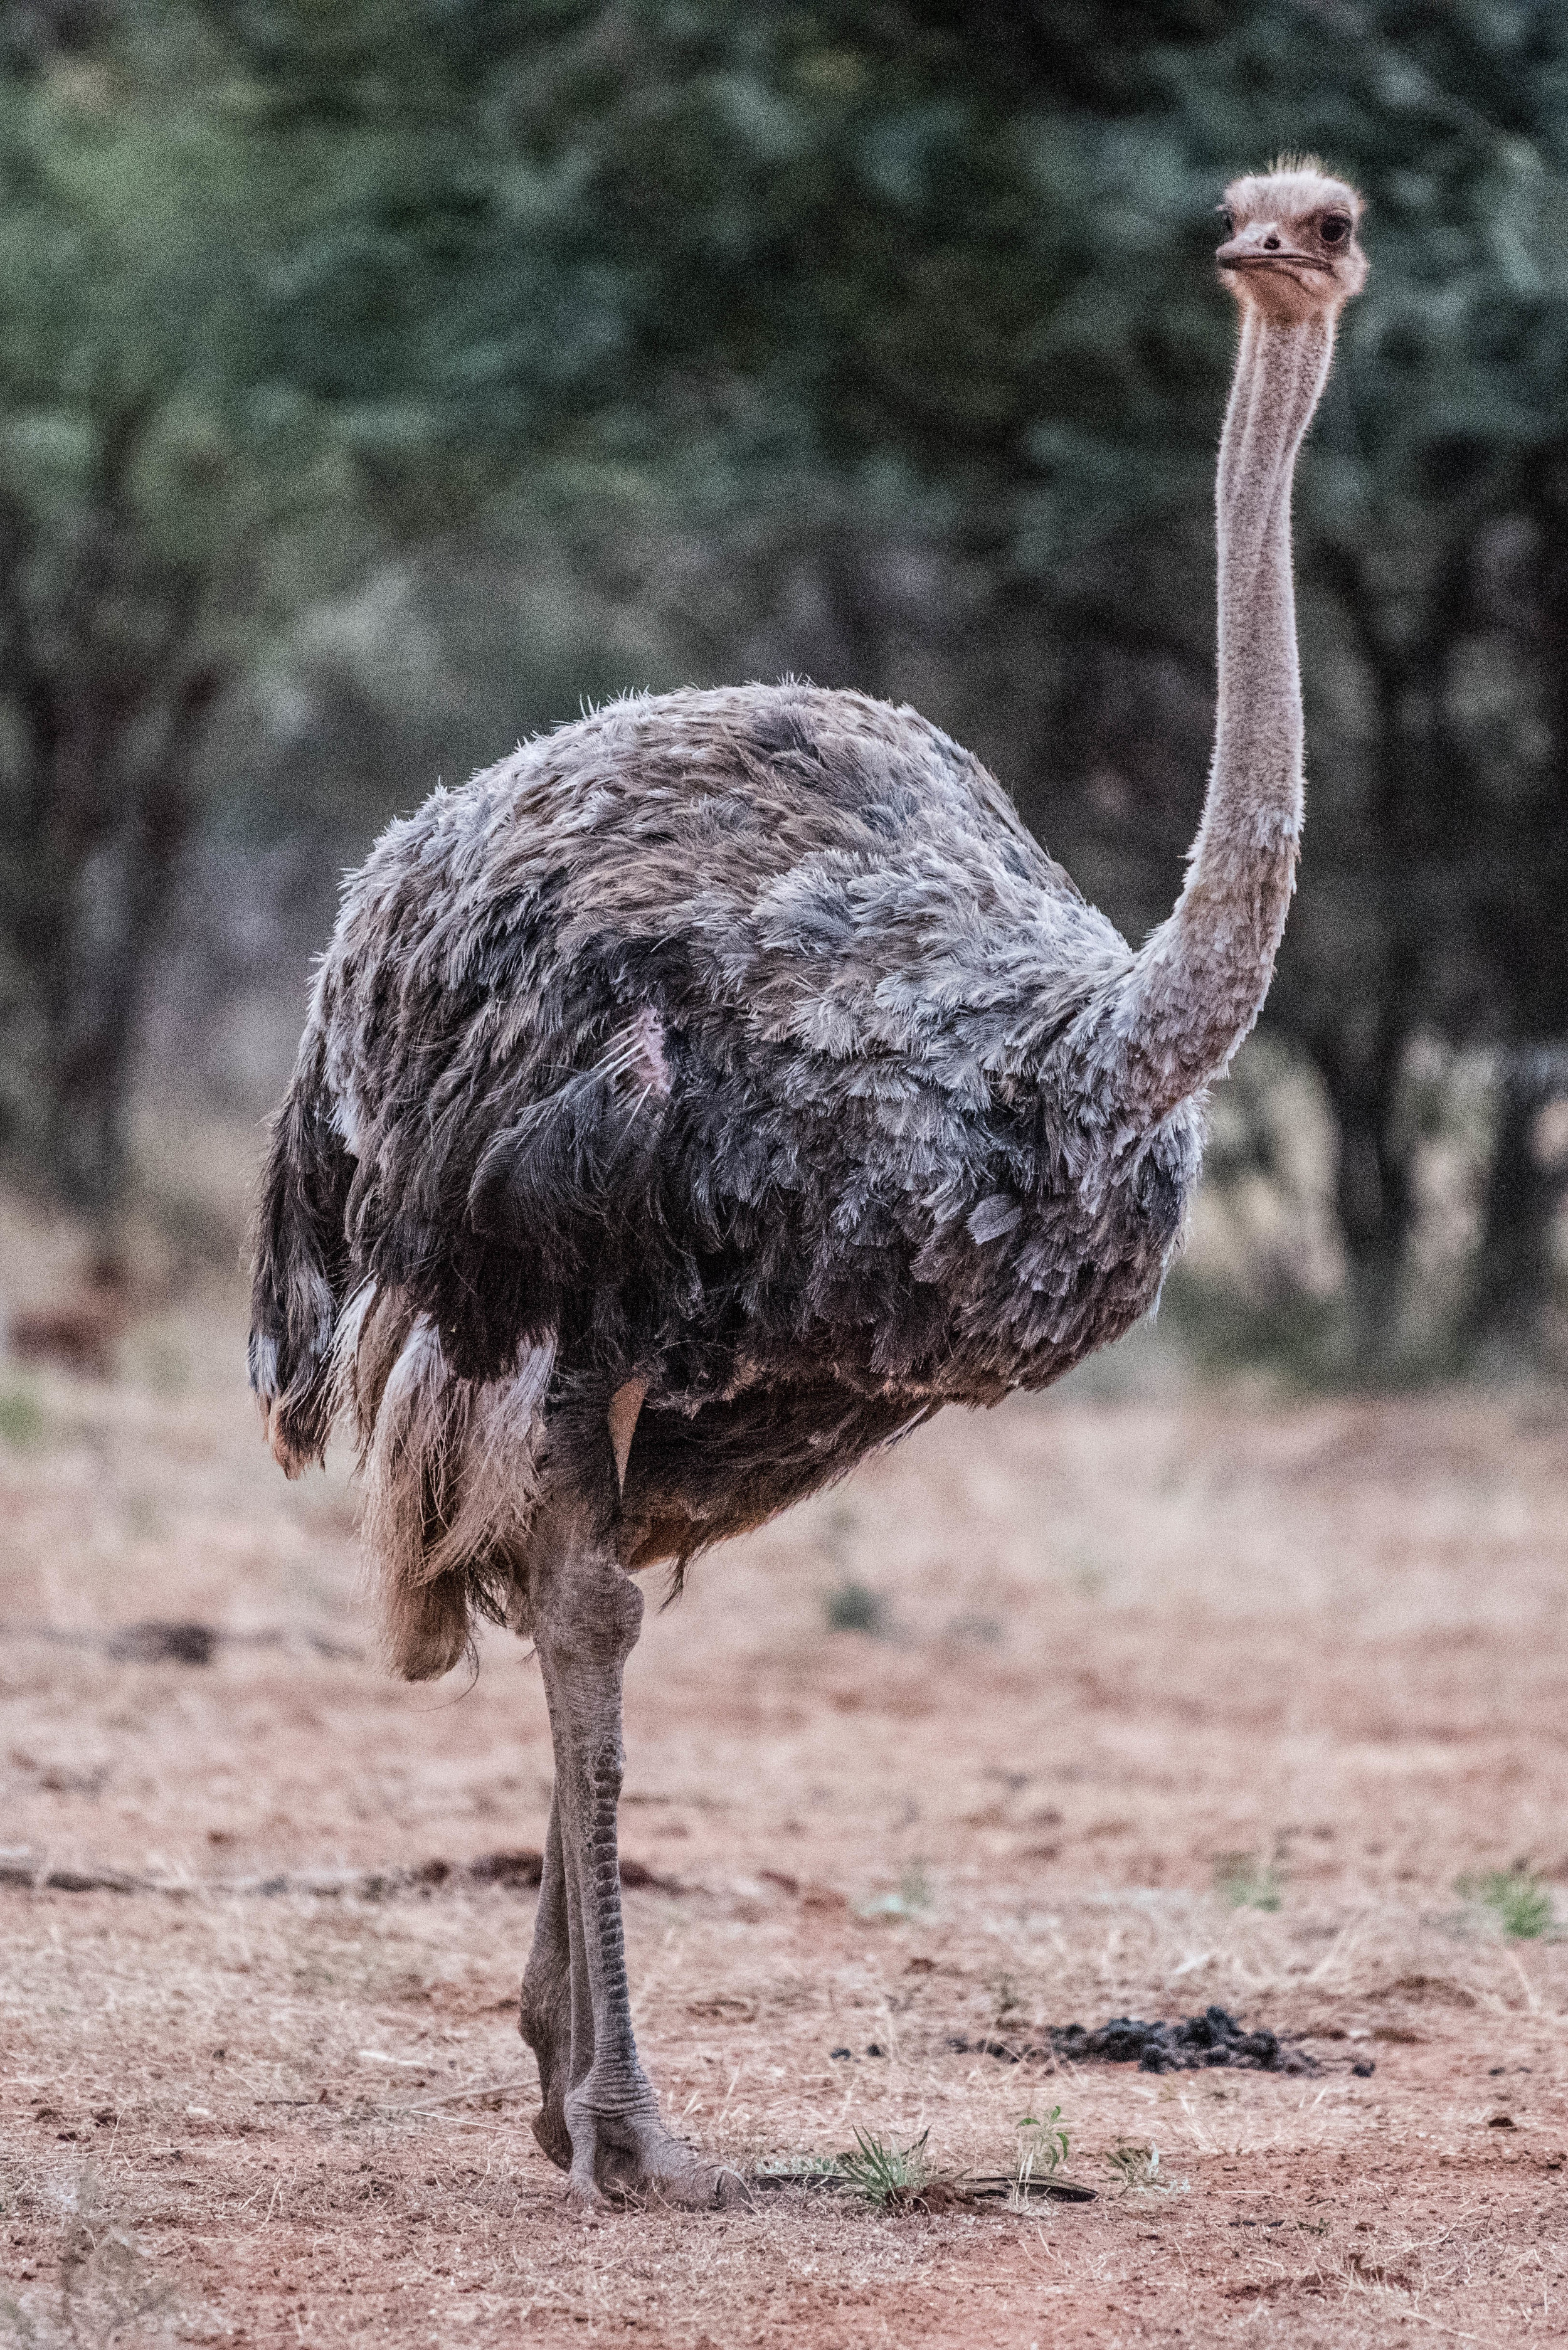 Ostrich, Madikwe Game Reserve, South Africa